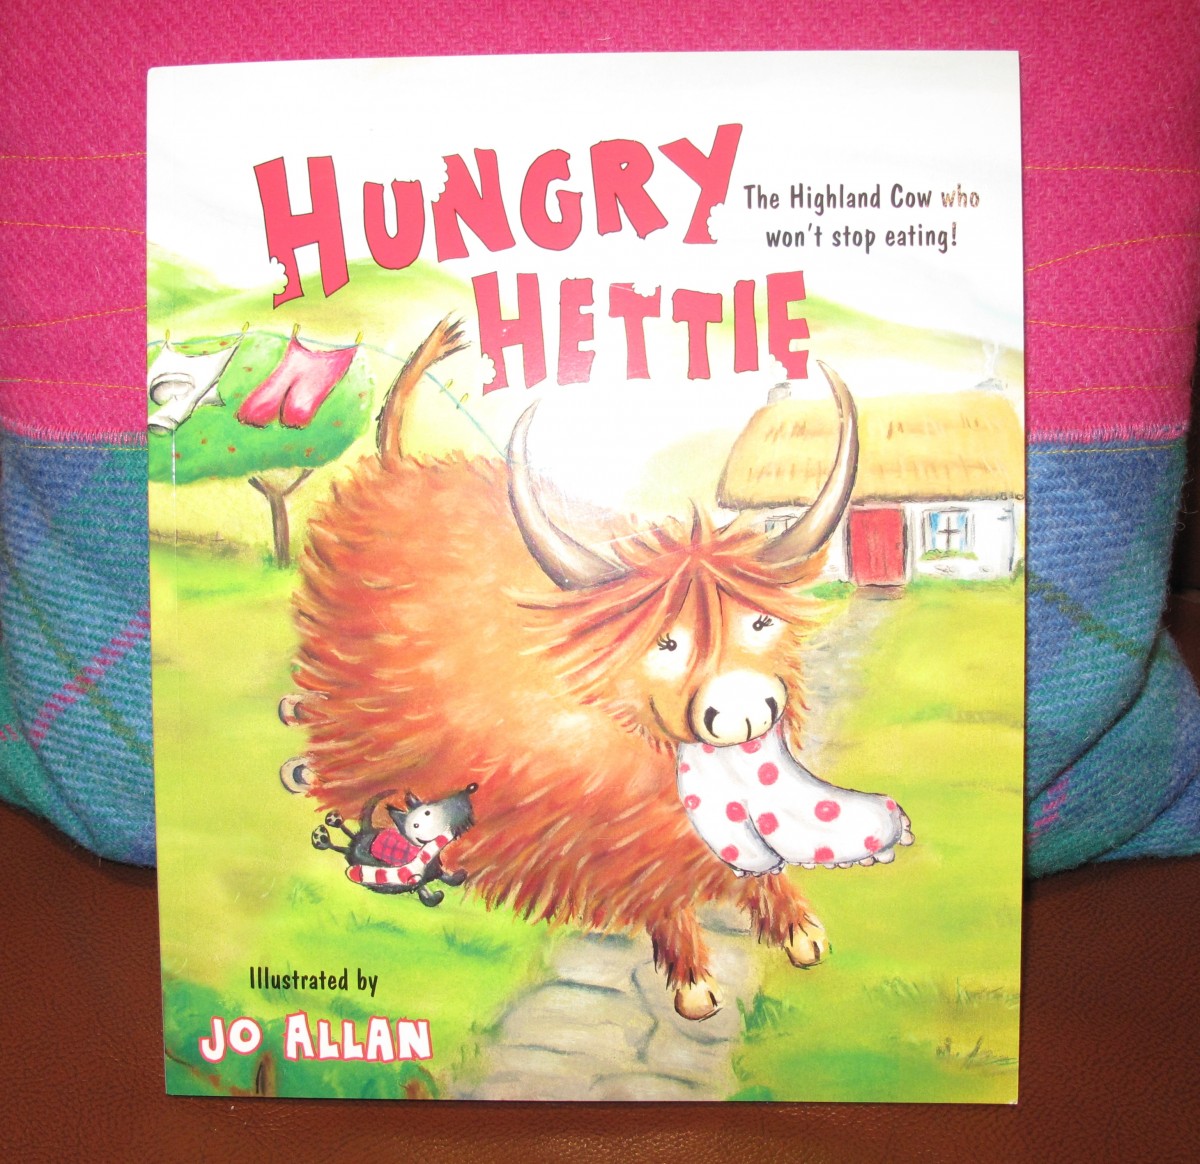 Book Feature: Hungry Hettie